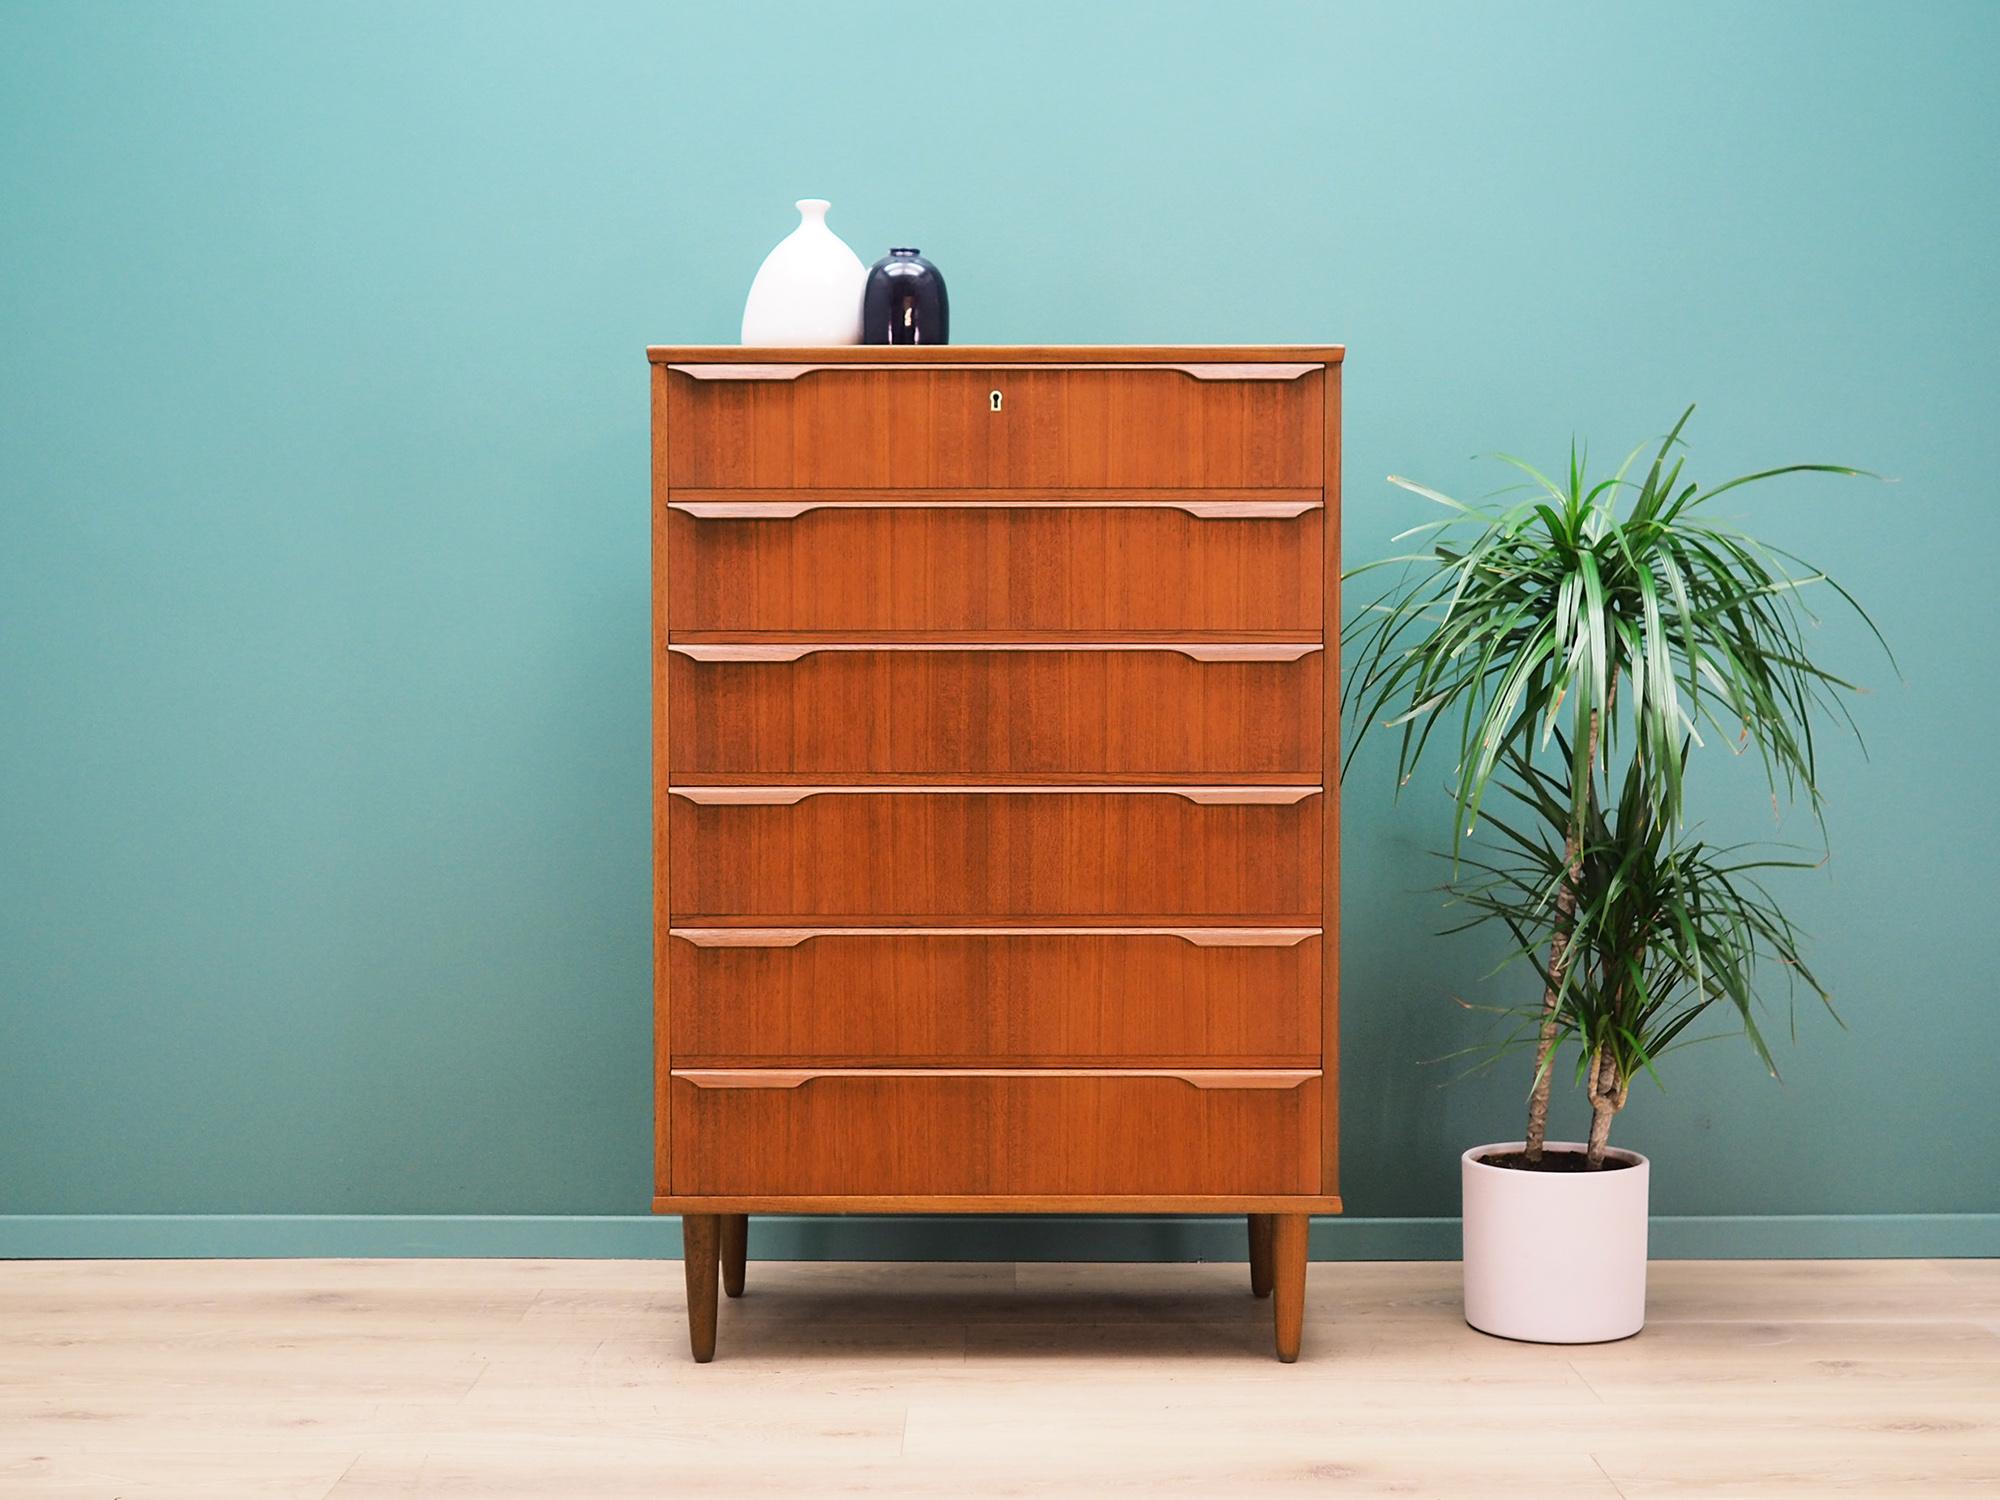 Chest of drawers was made in the 1960s by the well-known Danish factory Trekanten-Hestbæk A/S.

The construction is covered with teak veneer. The legs and handles are made of solid teak. Surface after refreshing. The chest of drawers is a Classic